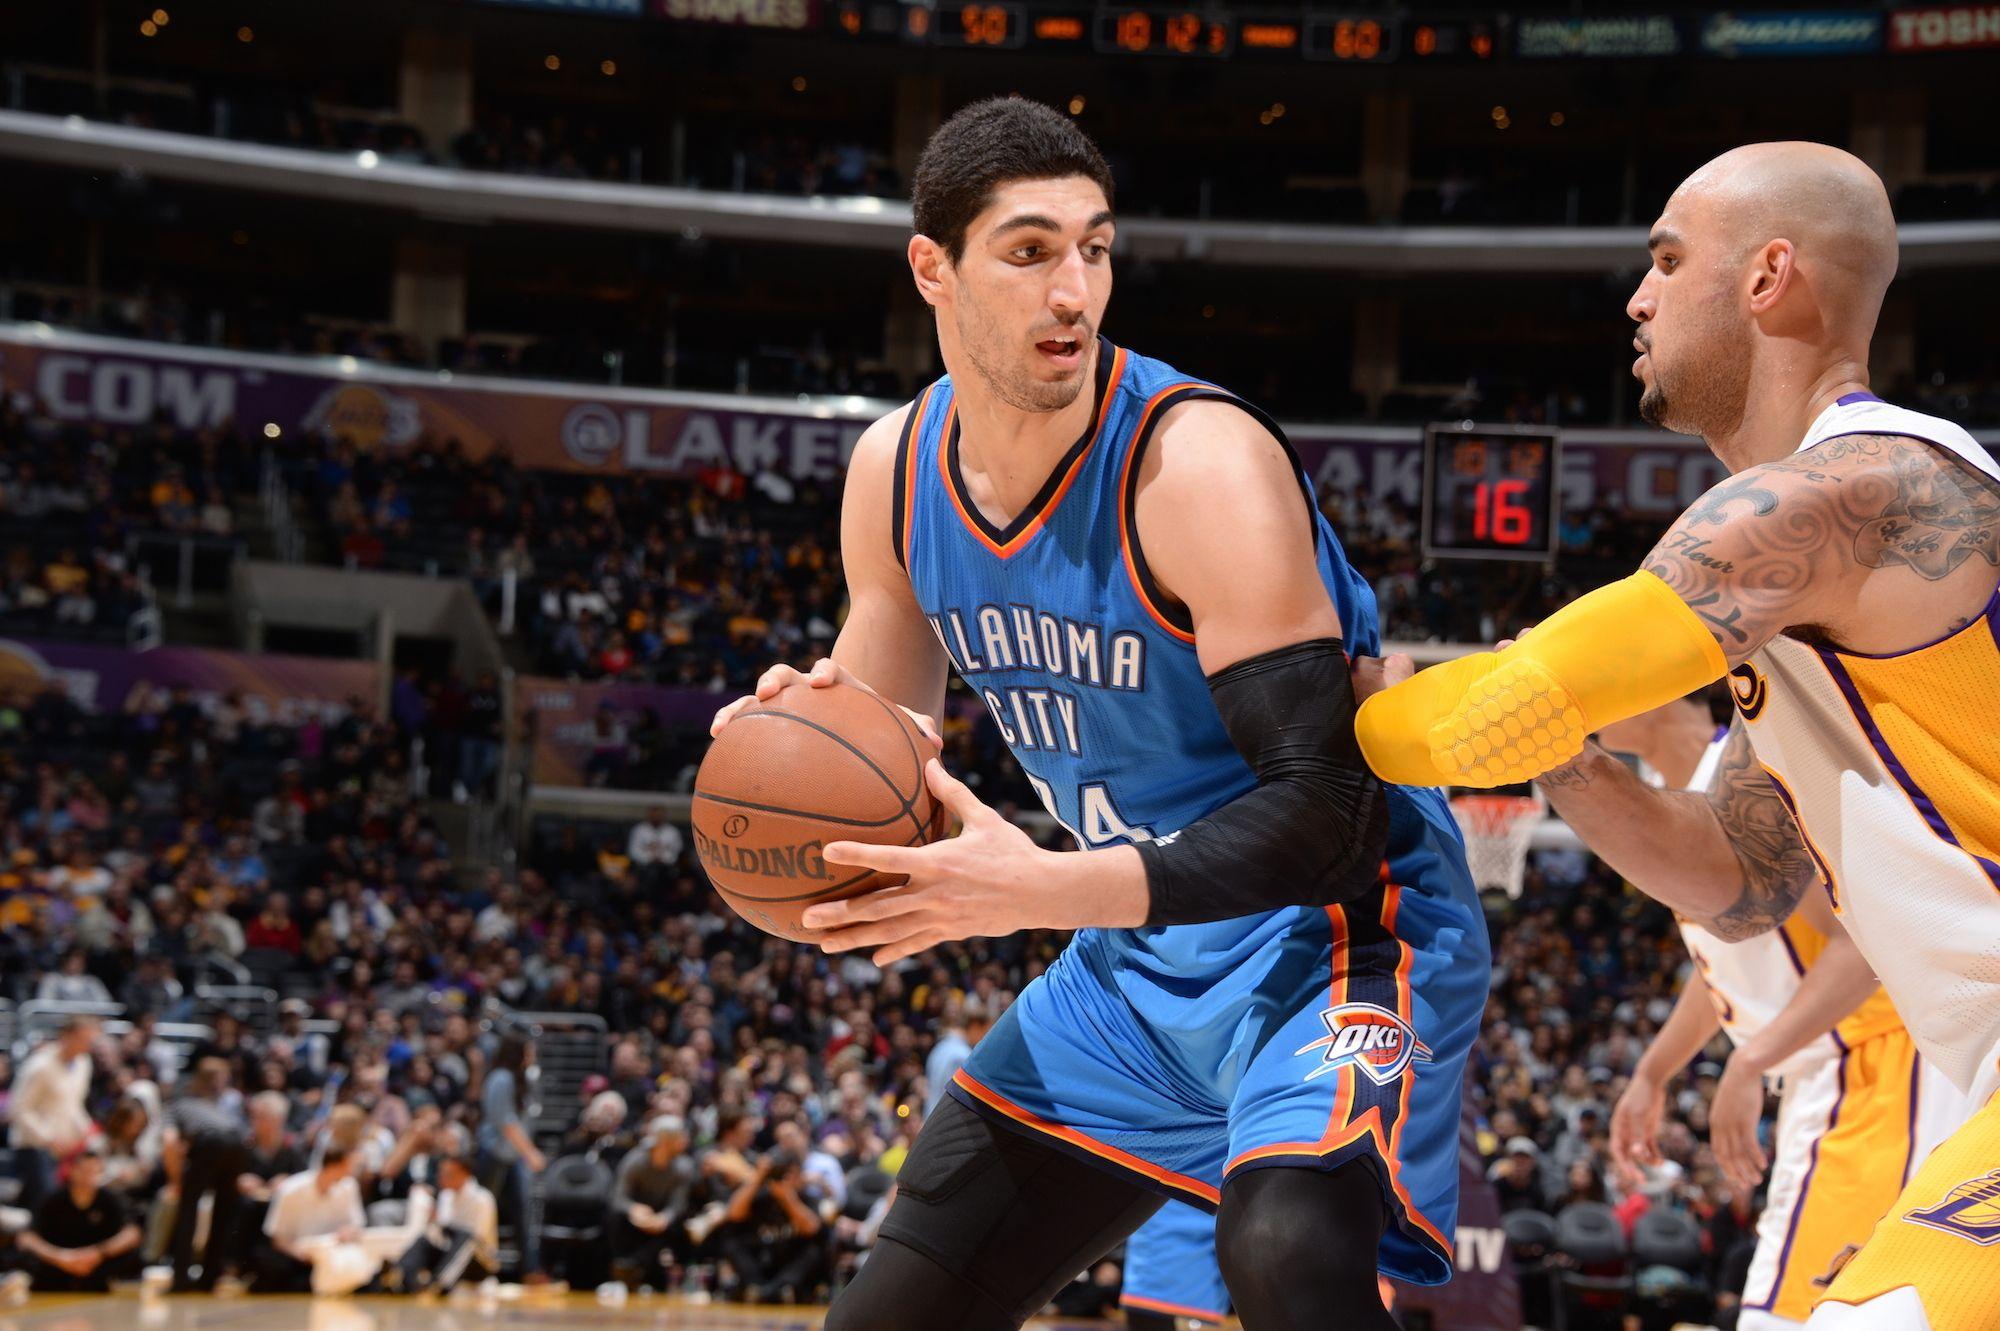 NBA Hotline Bling: Enes Kanter punches in the numbers